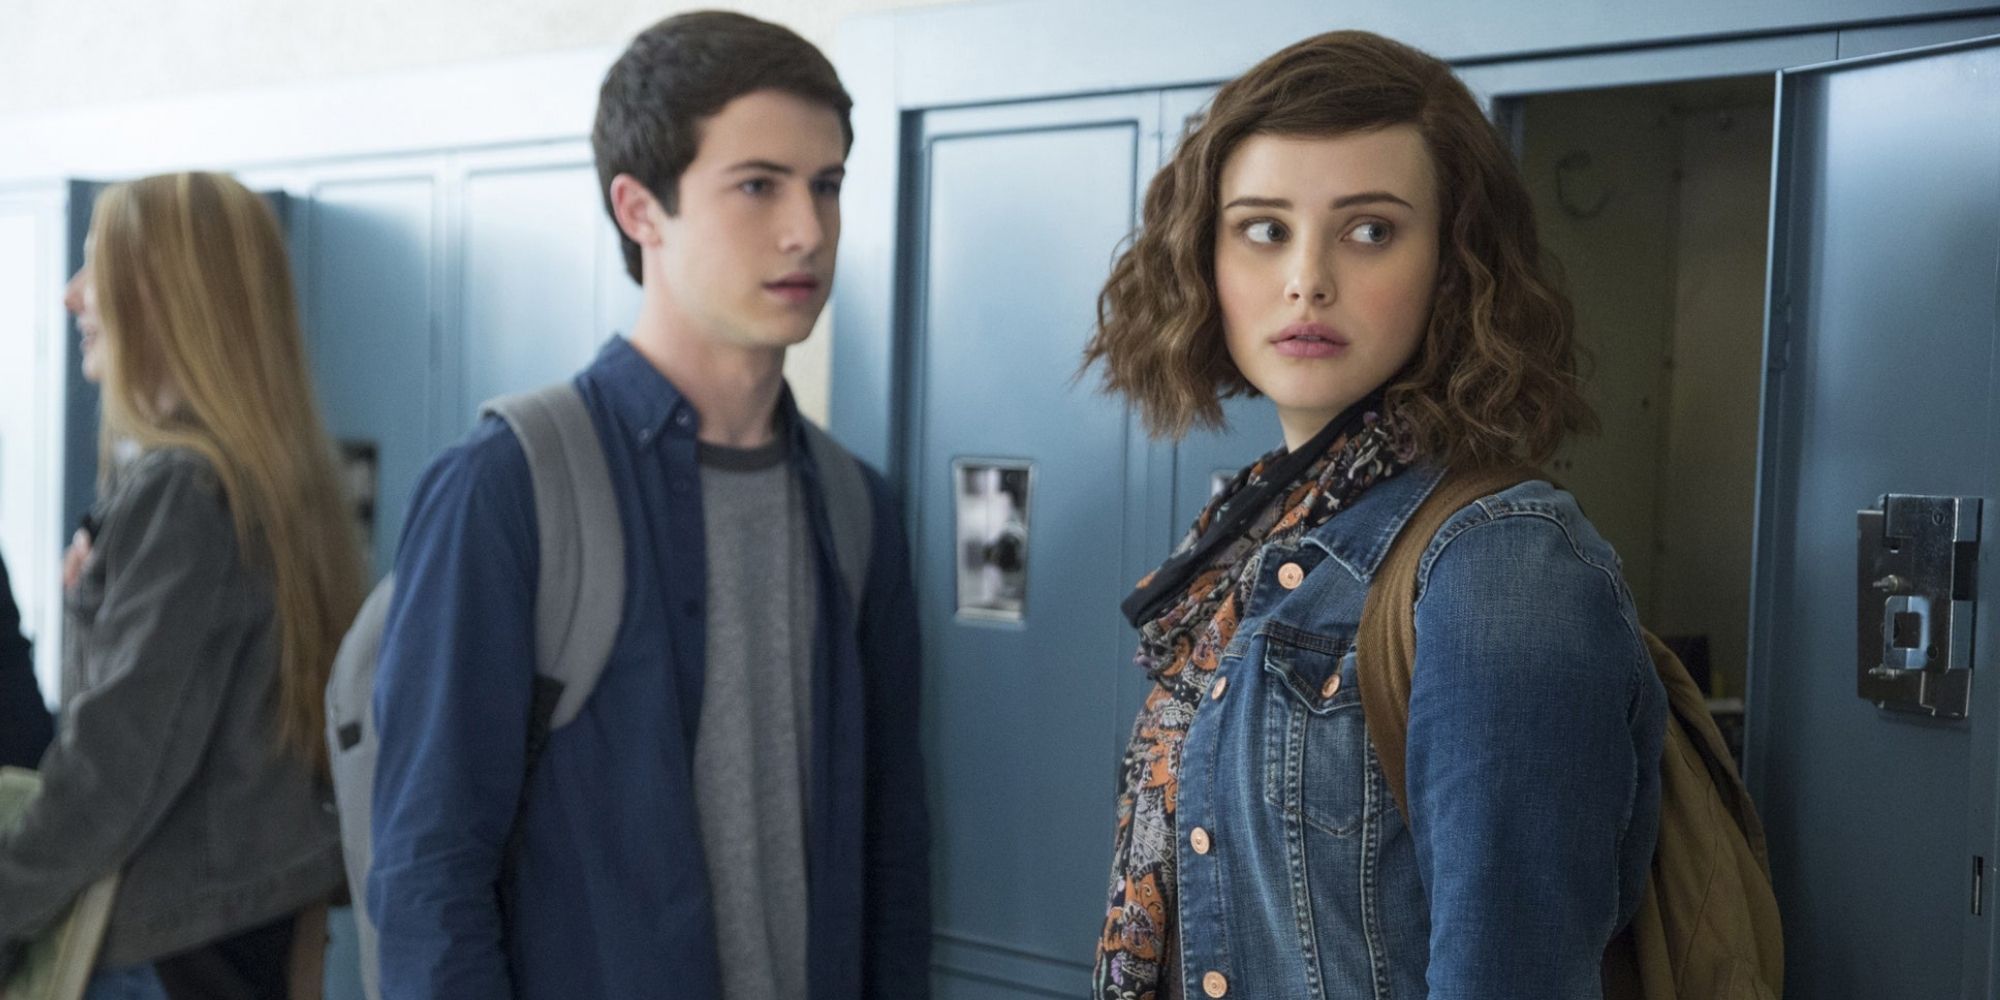 Dylan Minnette and Katherine Langford in '13 Reasons Why' 